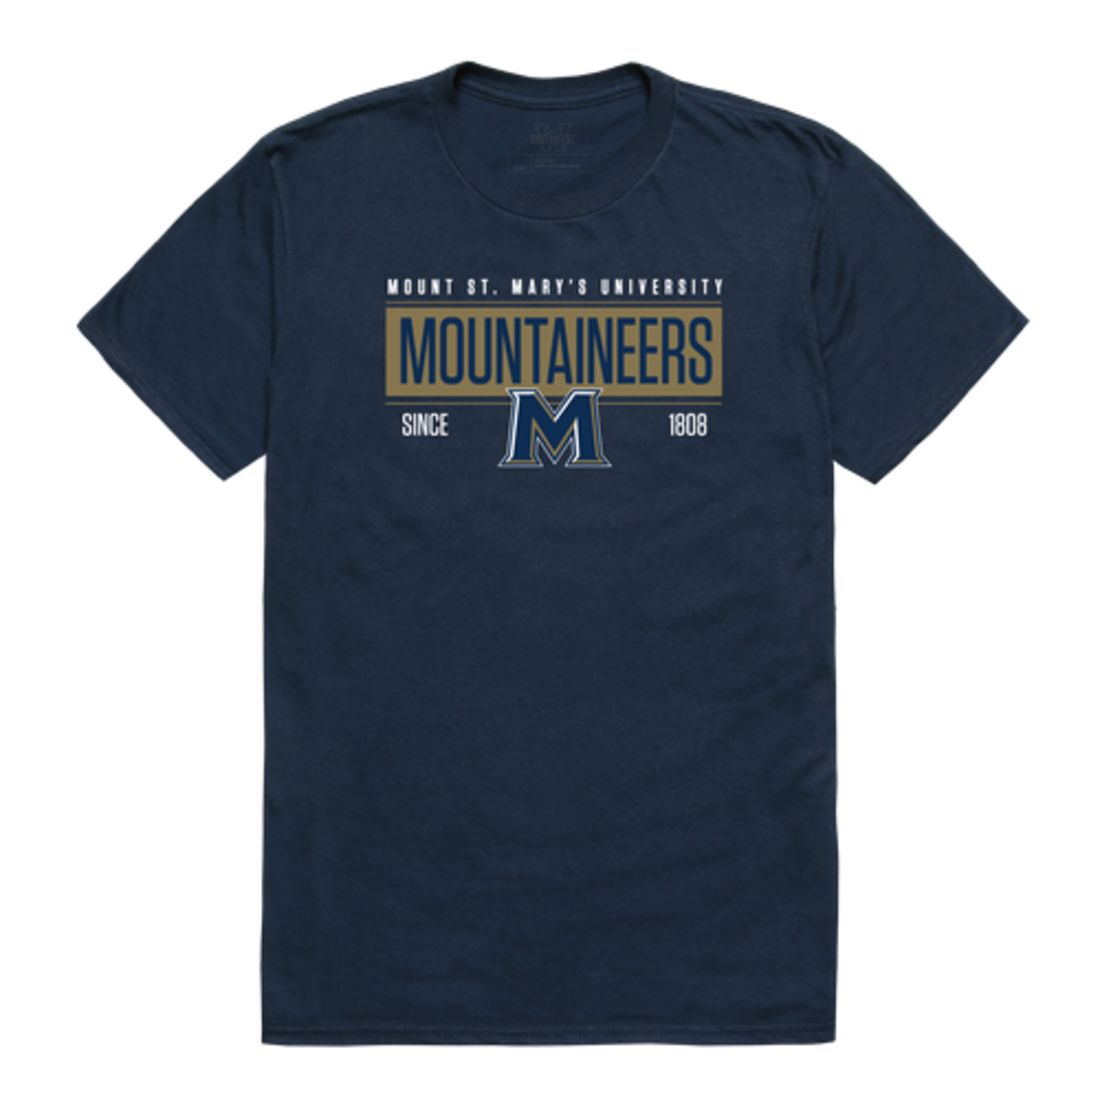 Mount St Mary's University Mountaineers Mountaineers Established T-Shirt